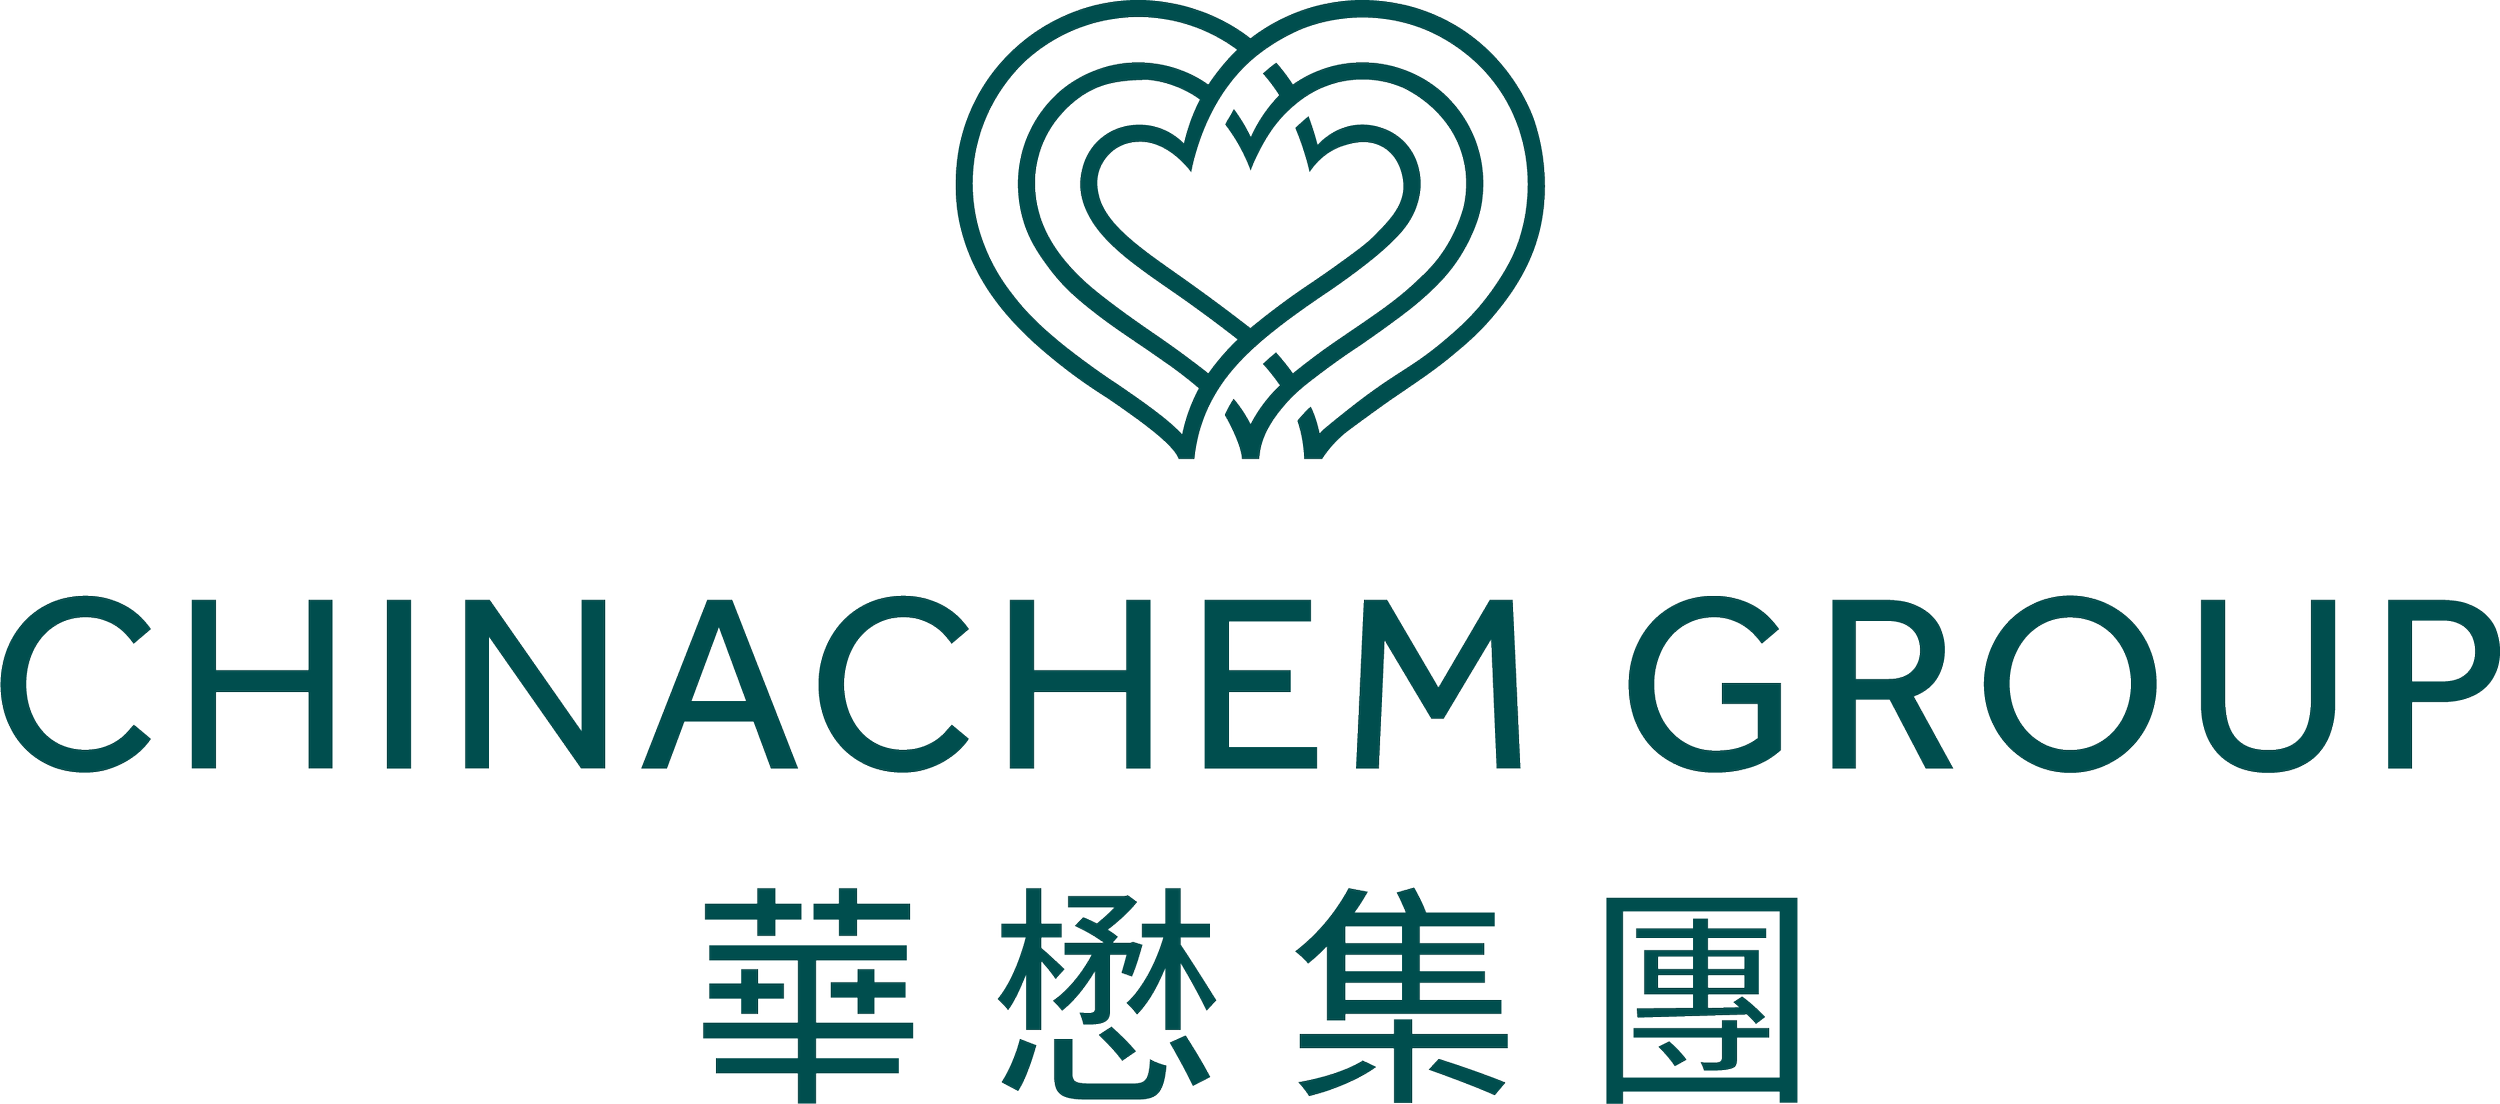 ChinaChem Group-01.png